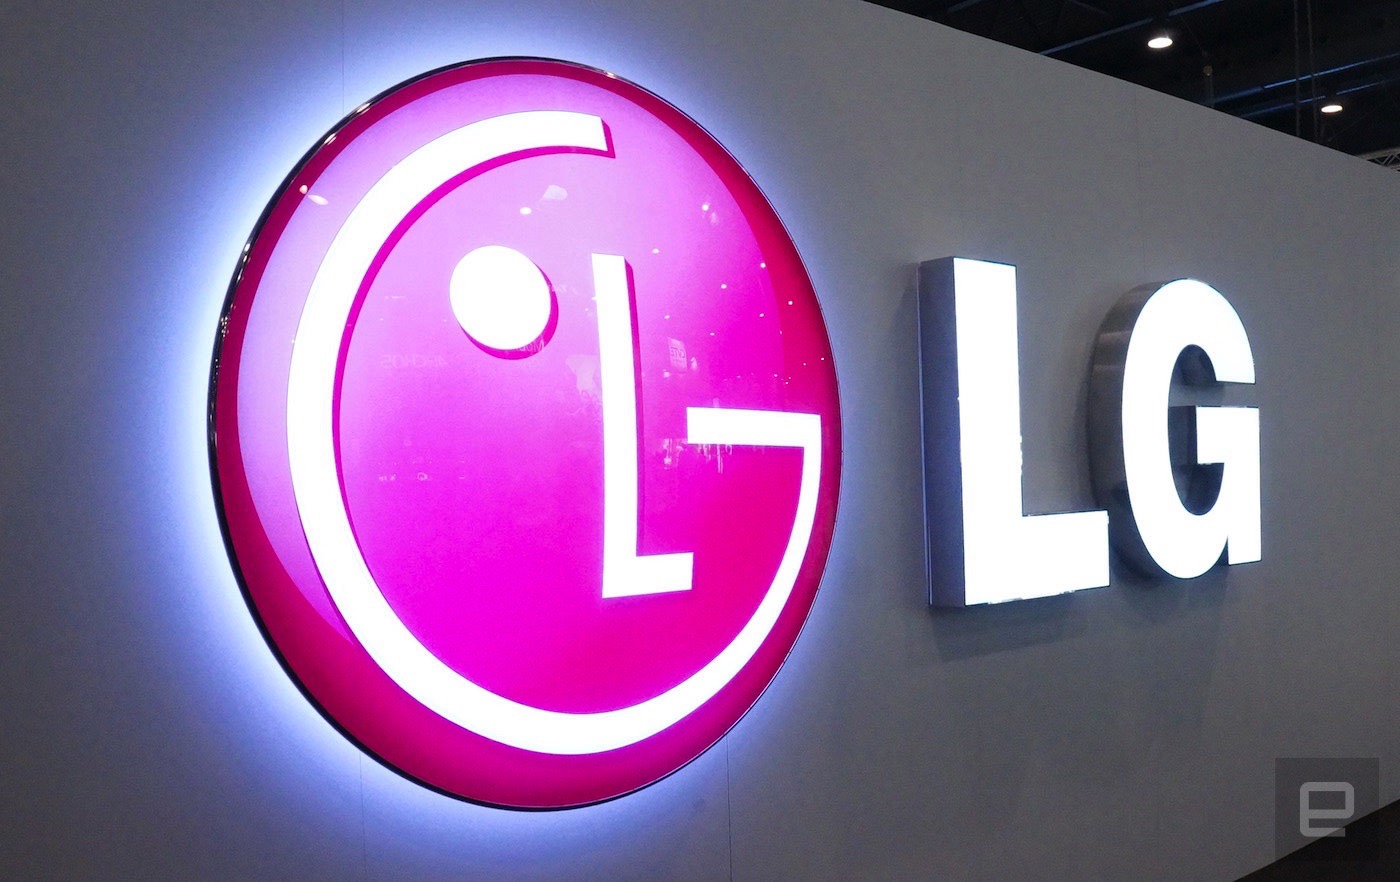 LG will reportedly unveil a universal payment card next month